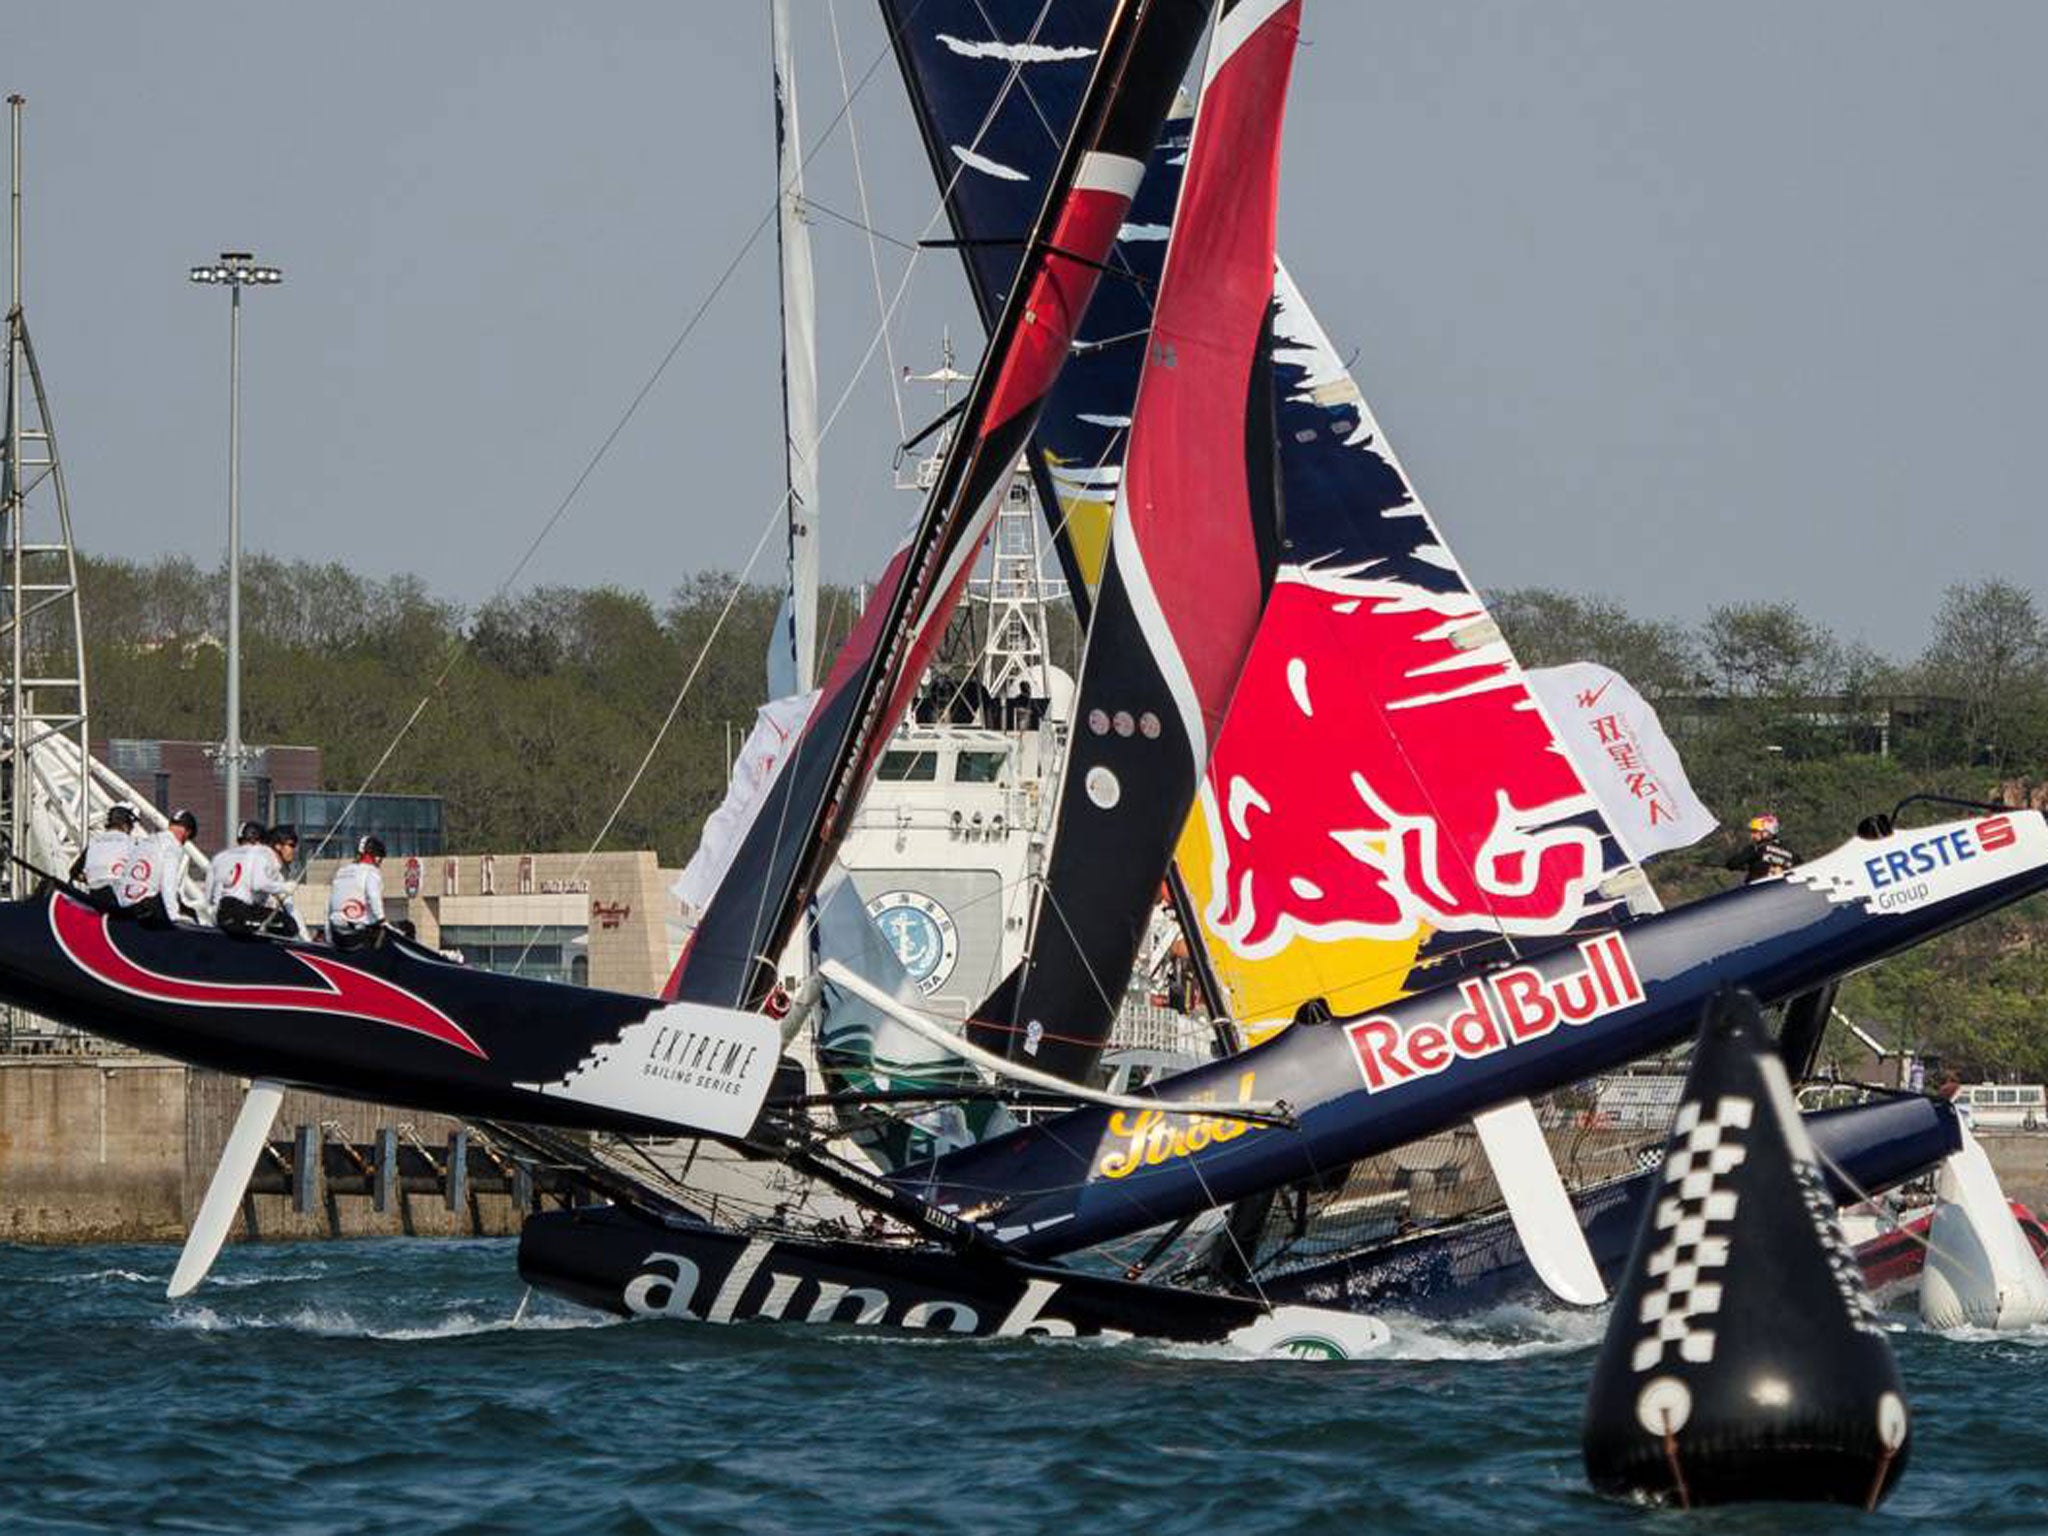 The Red Bull had regatta winner Alinghi on its horns on the final day of the Extreme Sailing Series in Qingdao, China